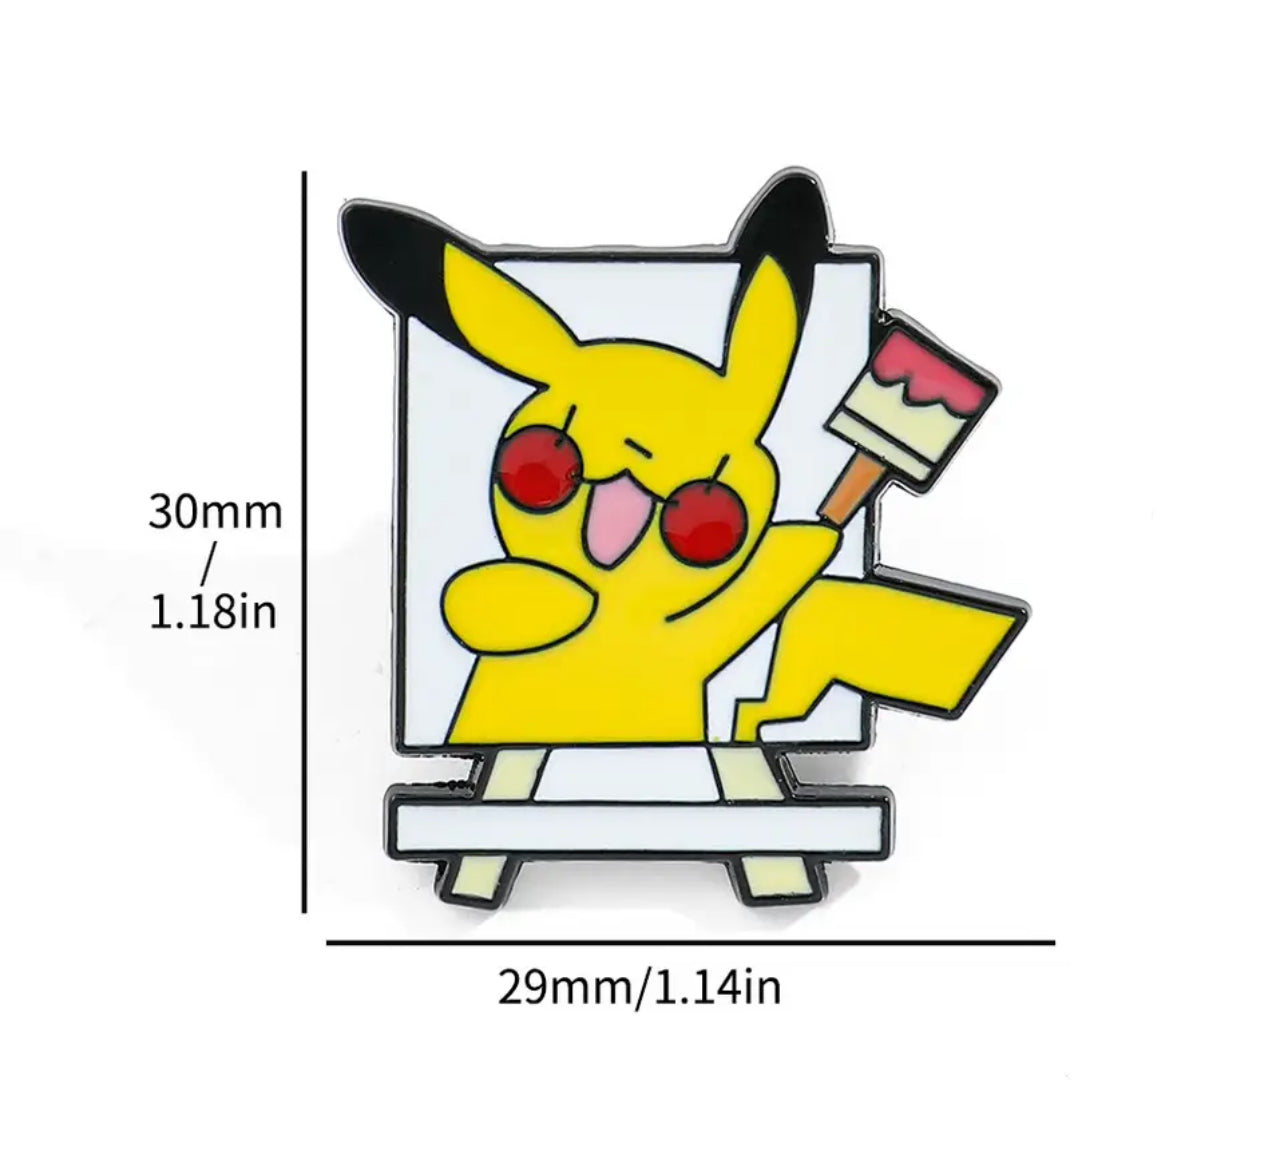 Pikachu is painting